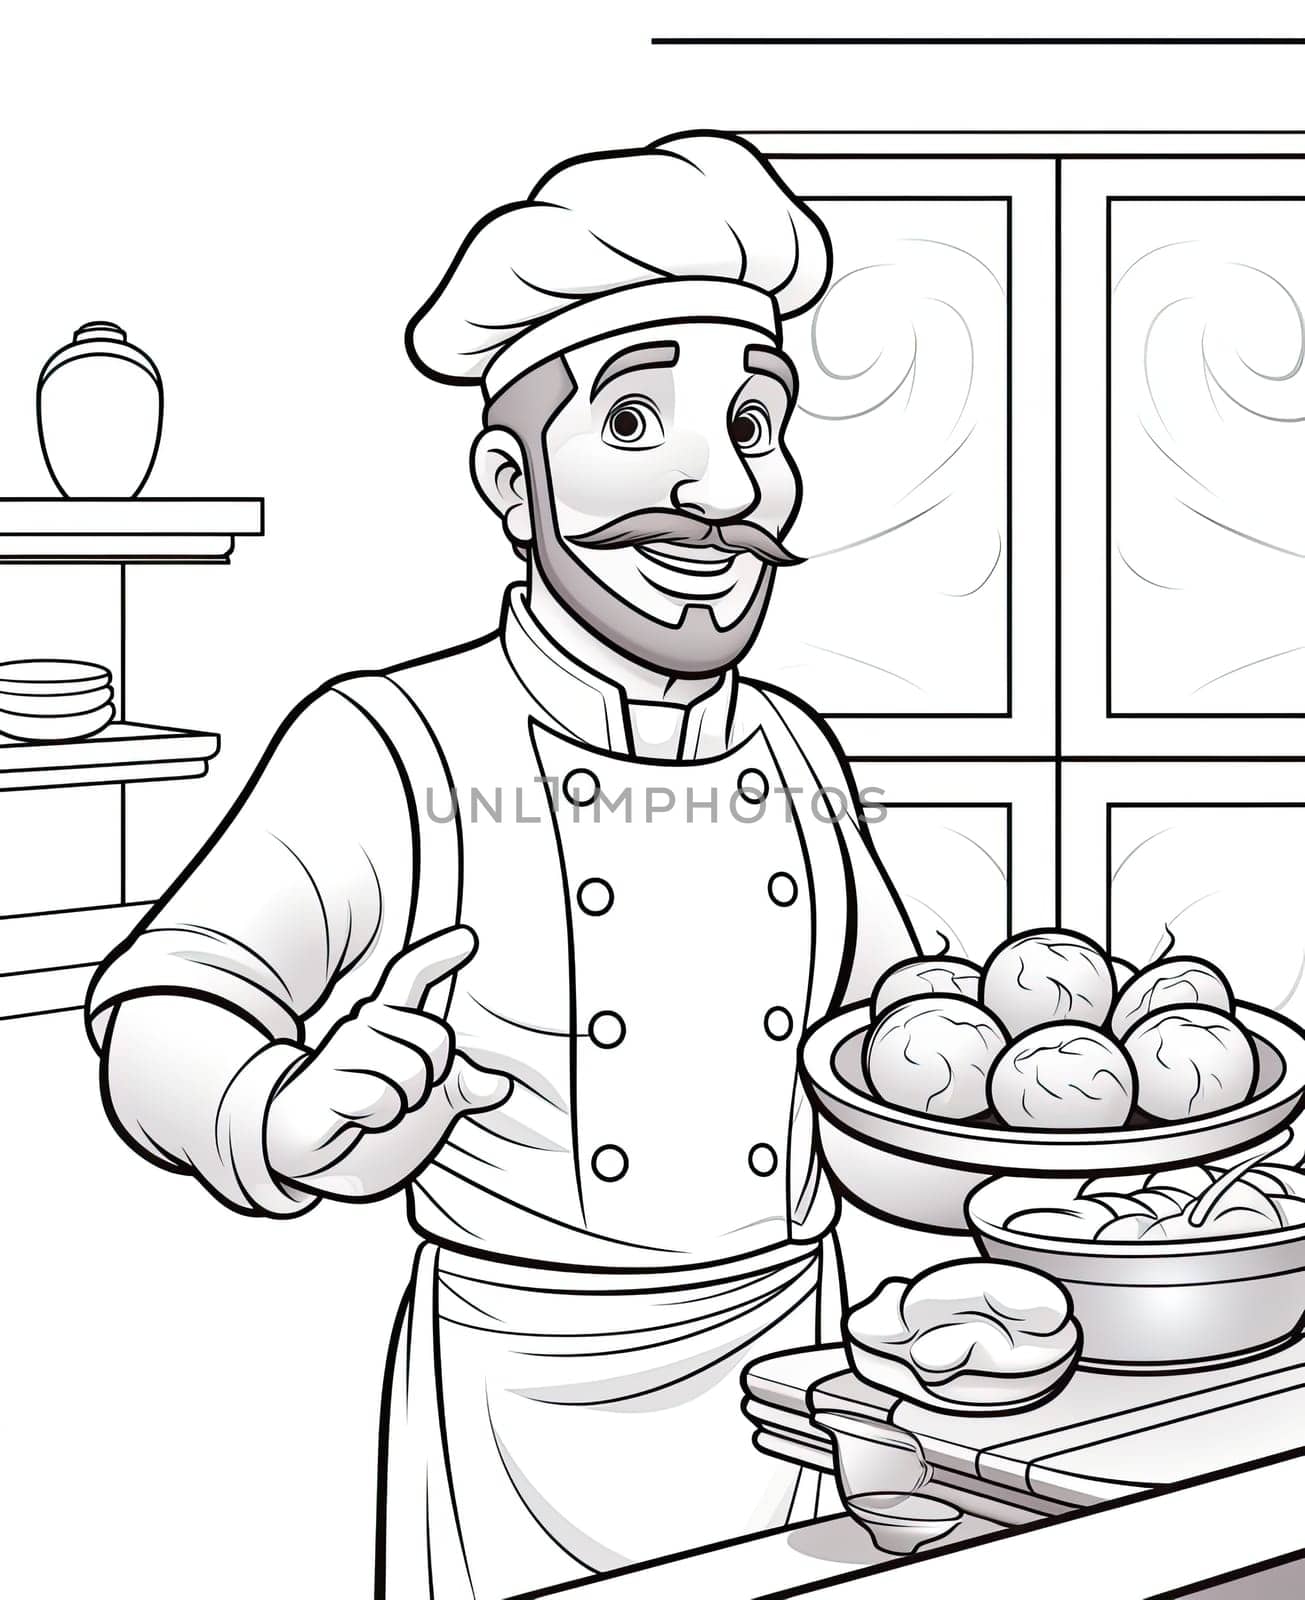 Coloring page for kids. An illustration of a chef preparing some tasty food.